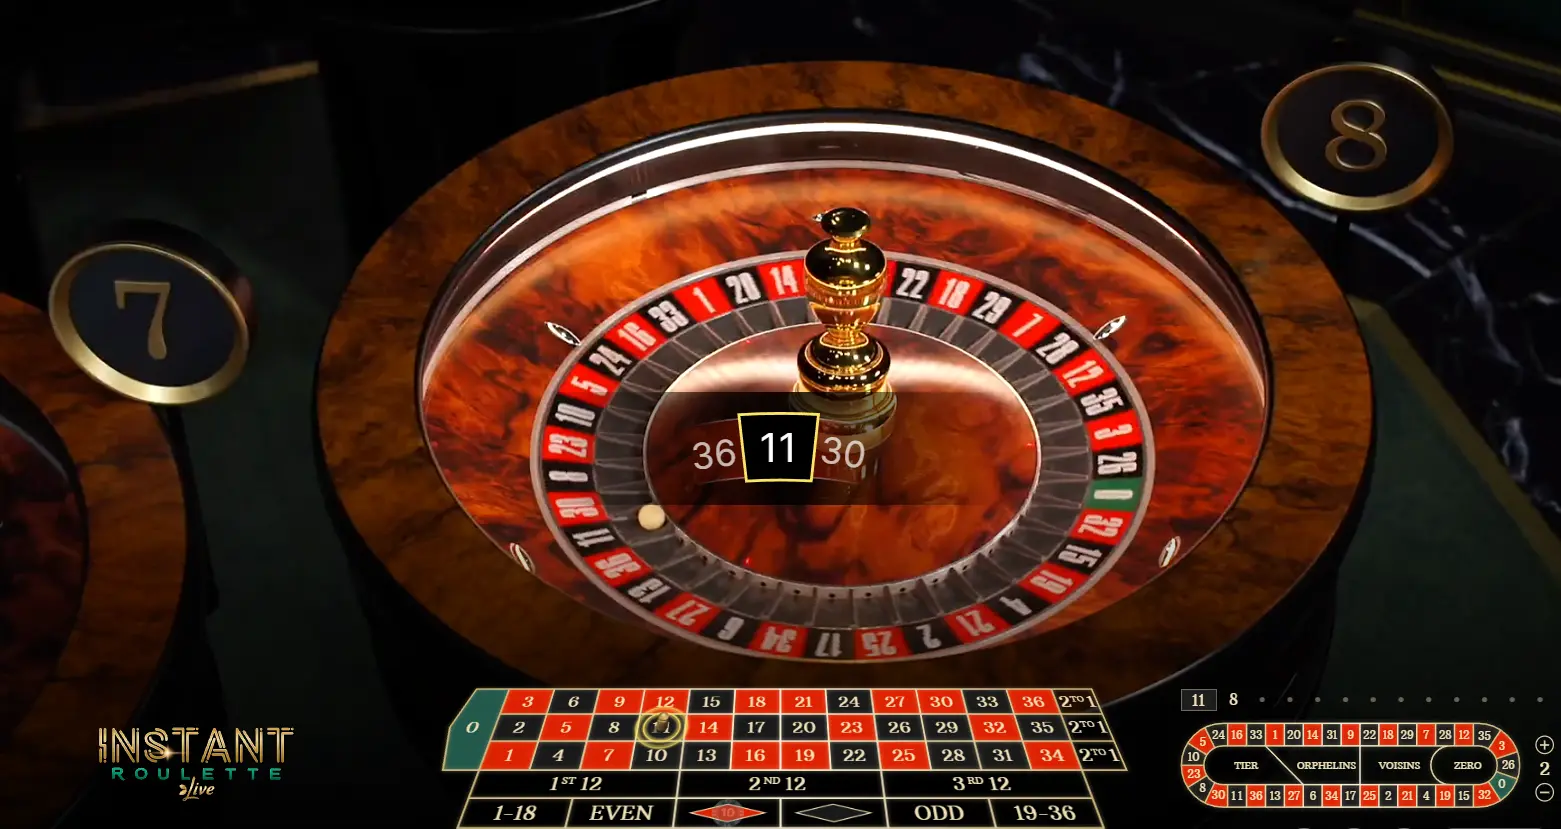 Instant Roulette is a revolutionary game that satisfies gamblers' desire to play at their own pace